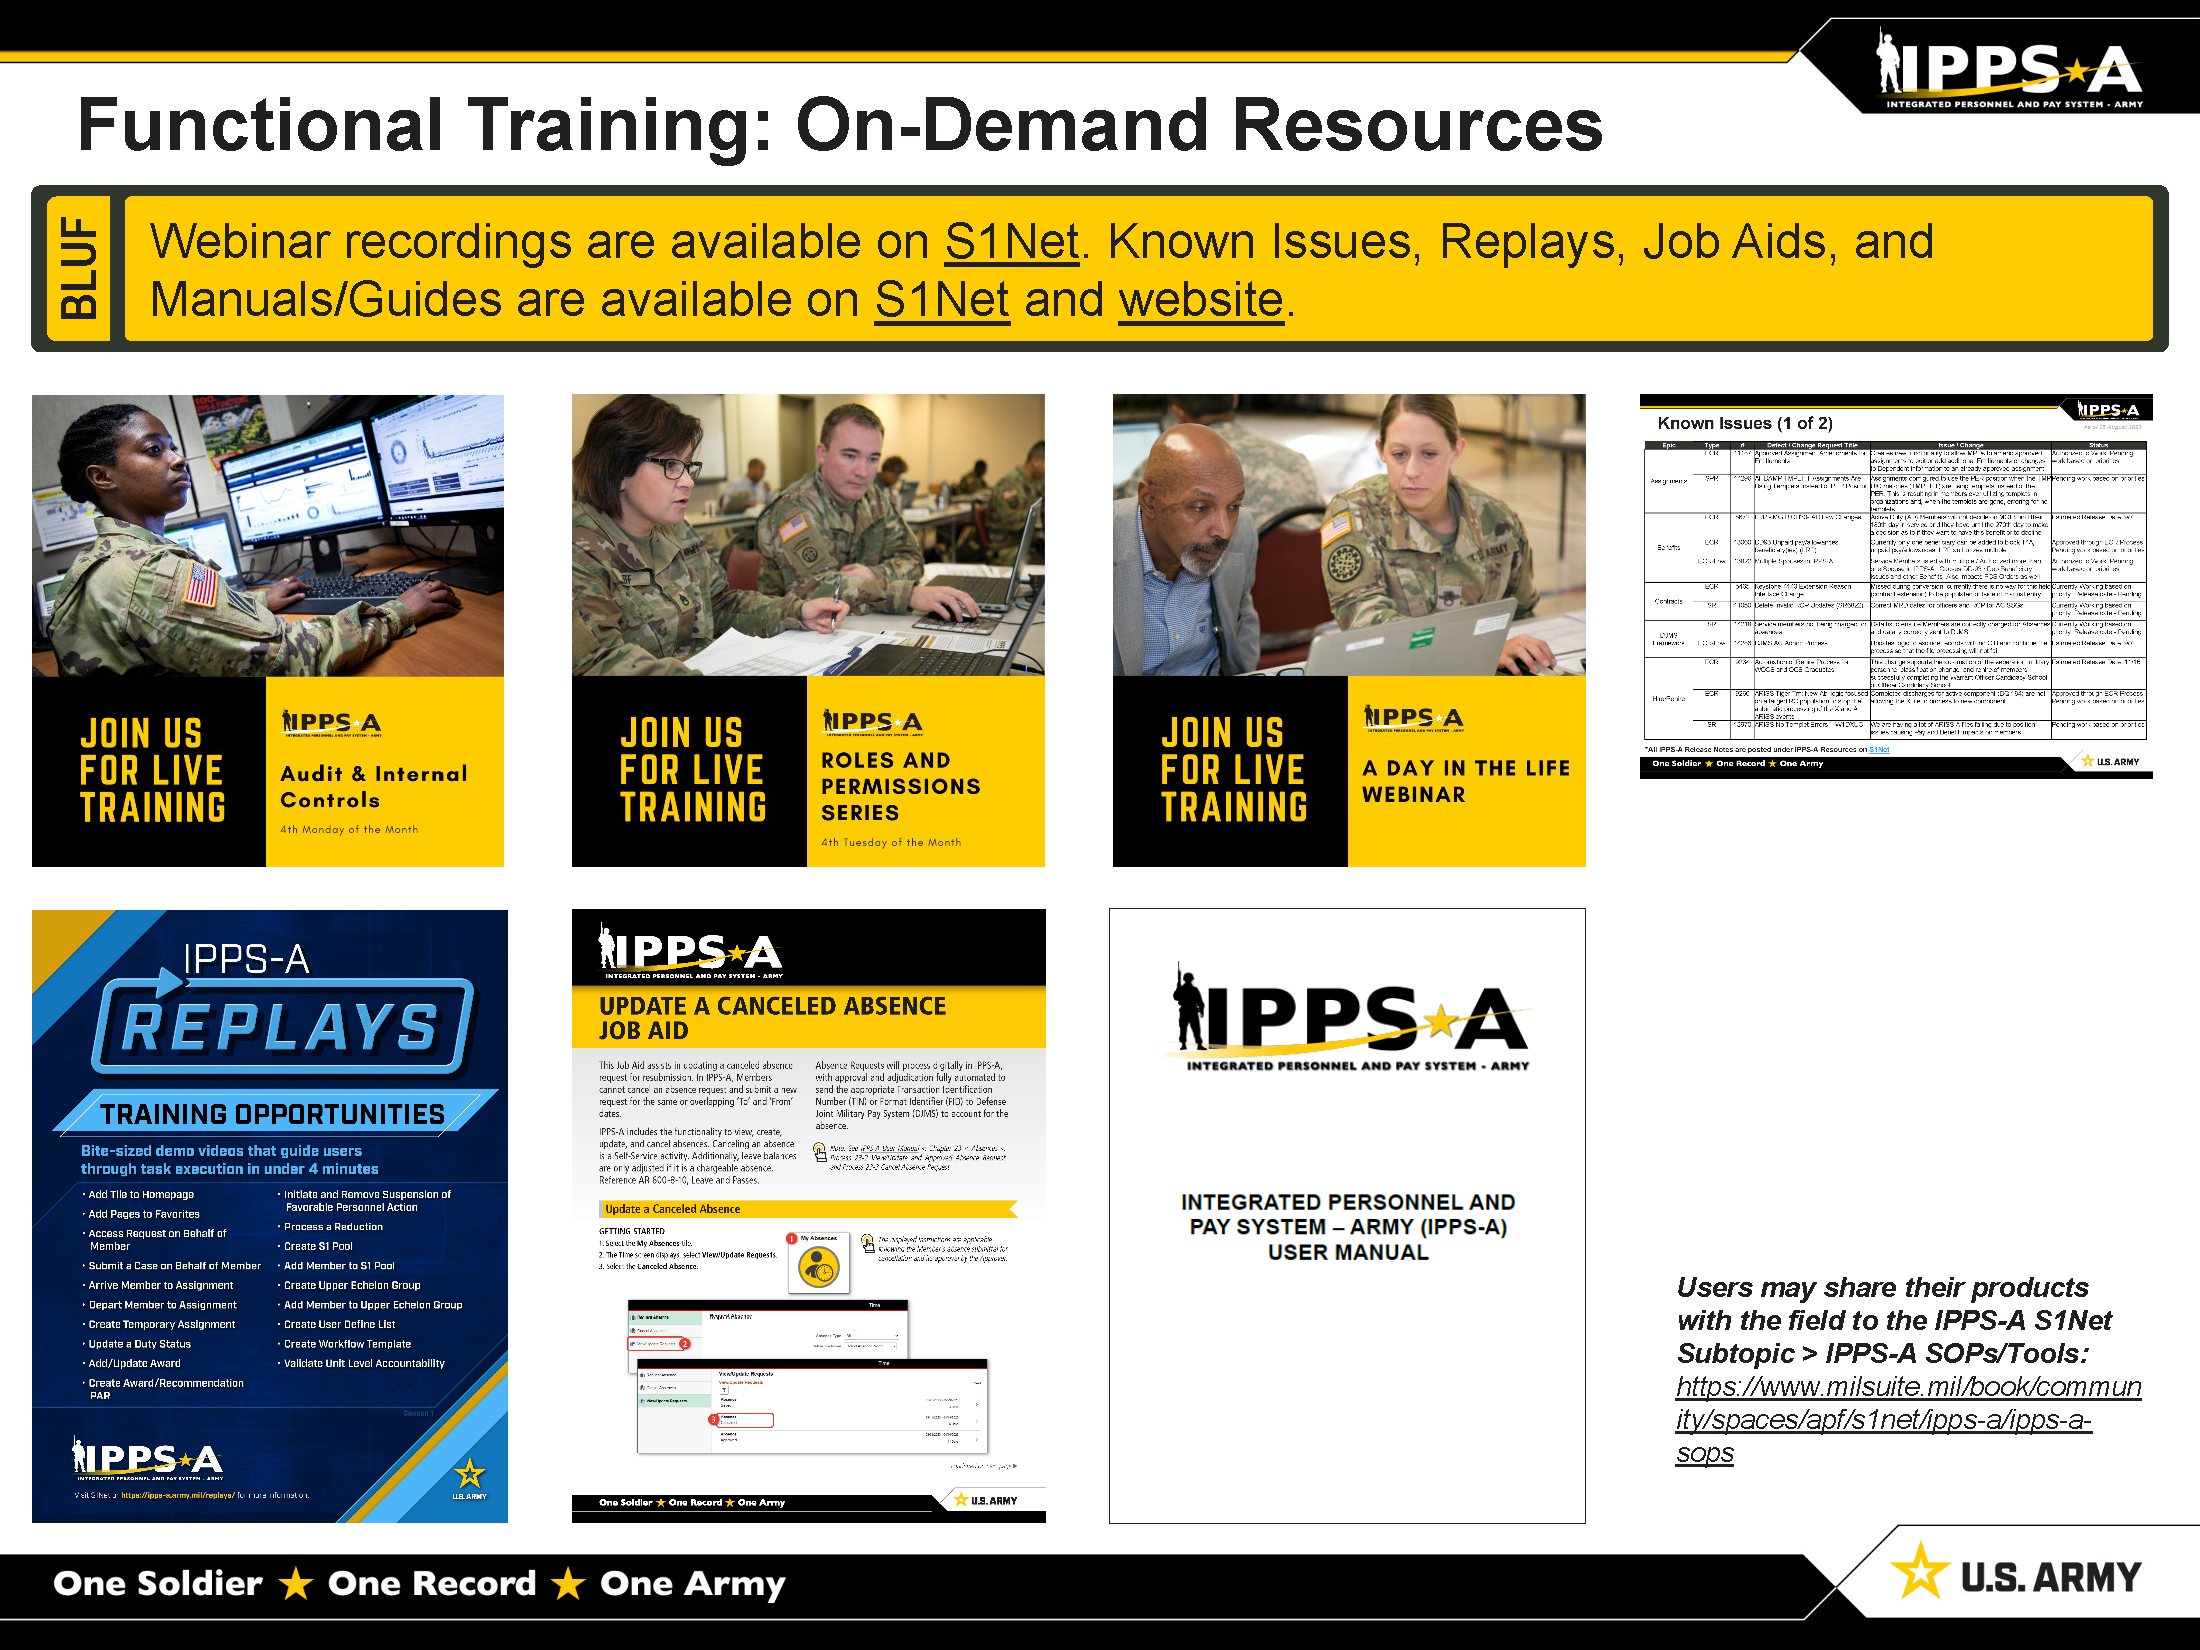 The Integrated Personnel and Pay System - Army